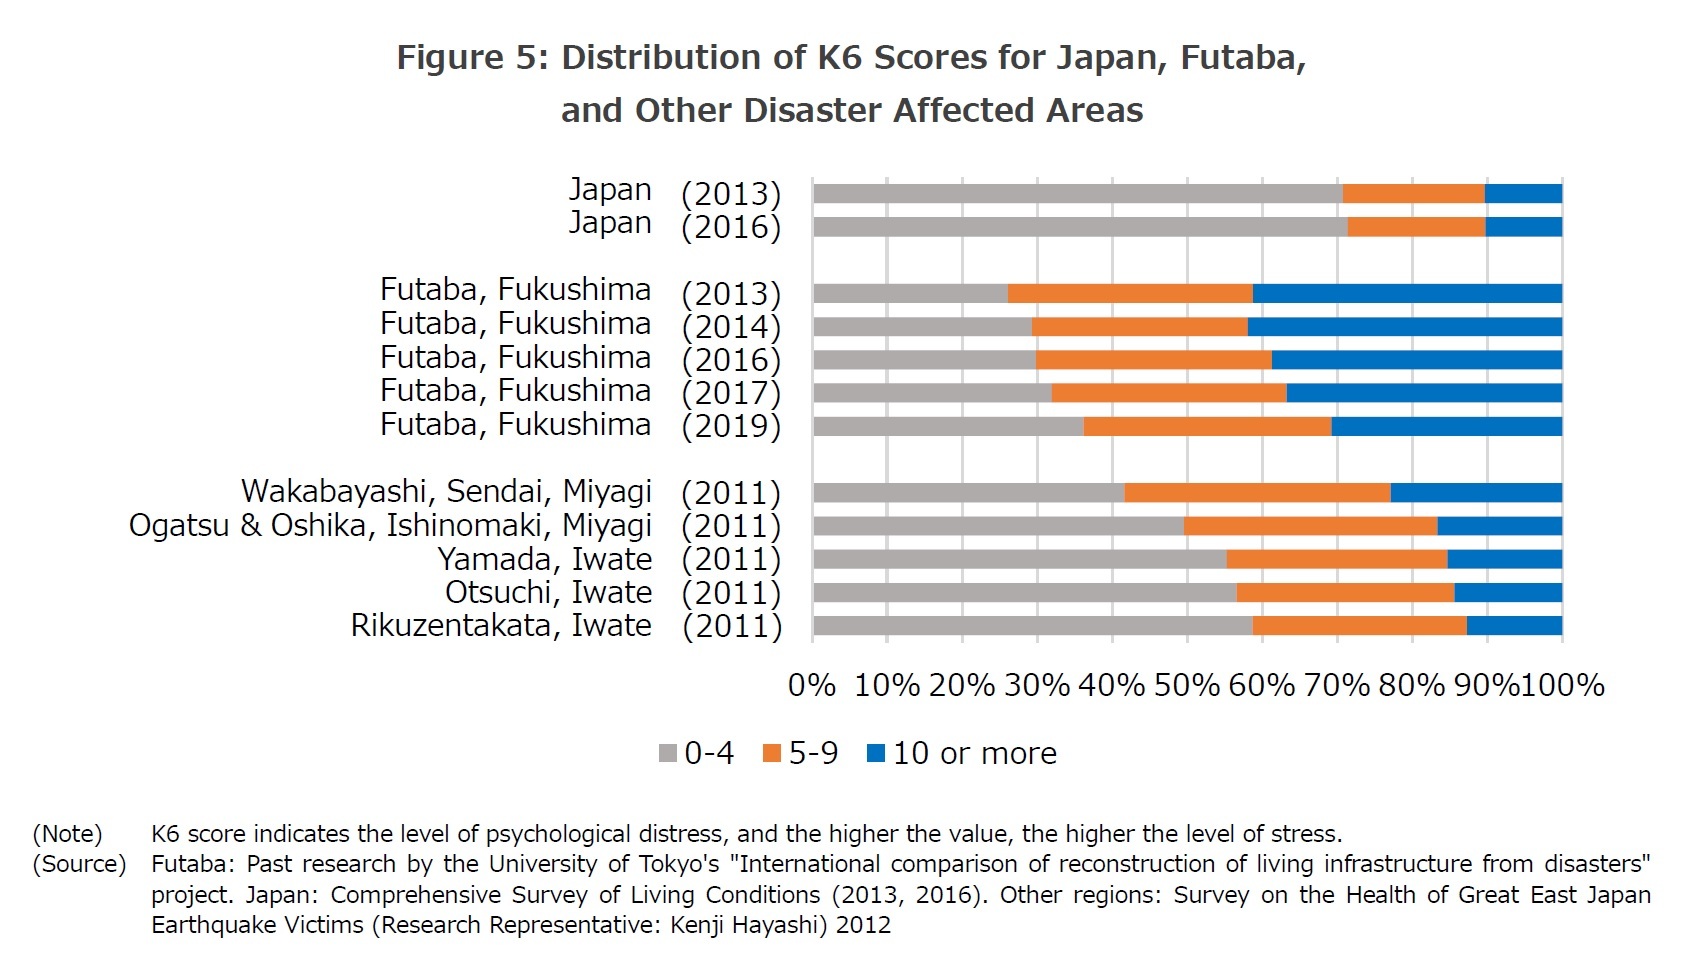 Figure 5: Distribution of K6 Scores for Japan, Futaba,  
and Other Disaster Affected Areas